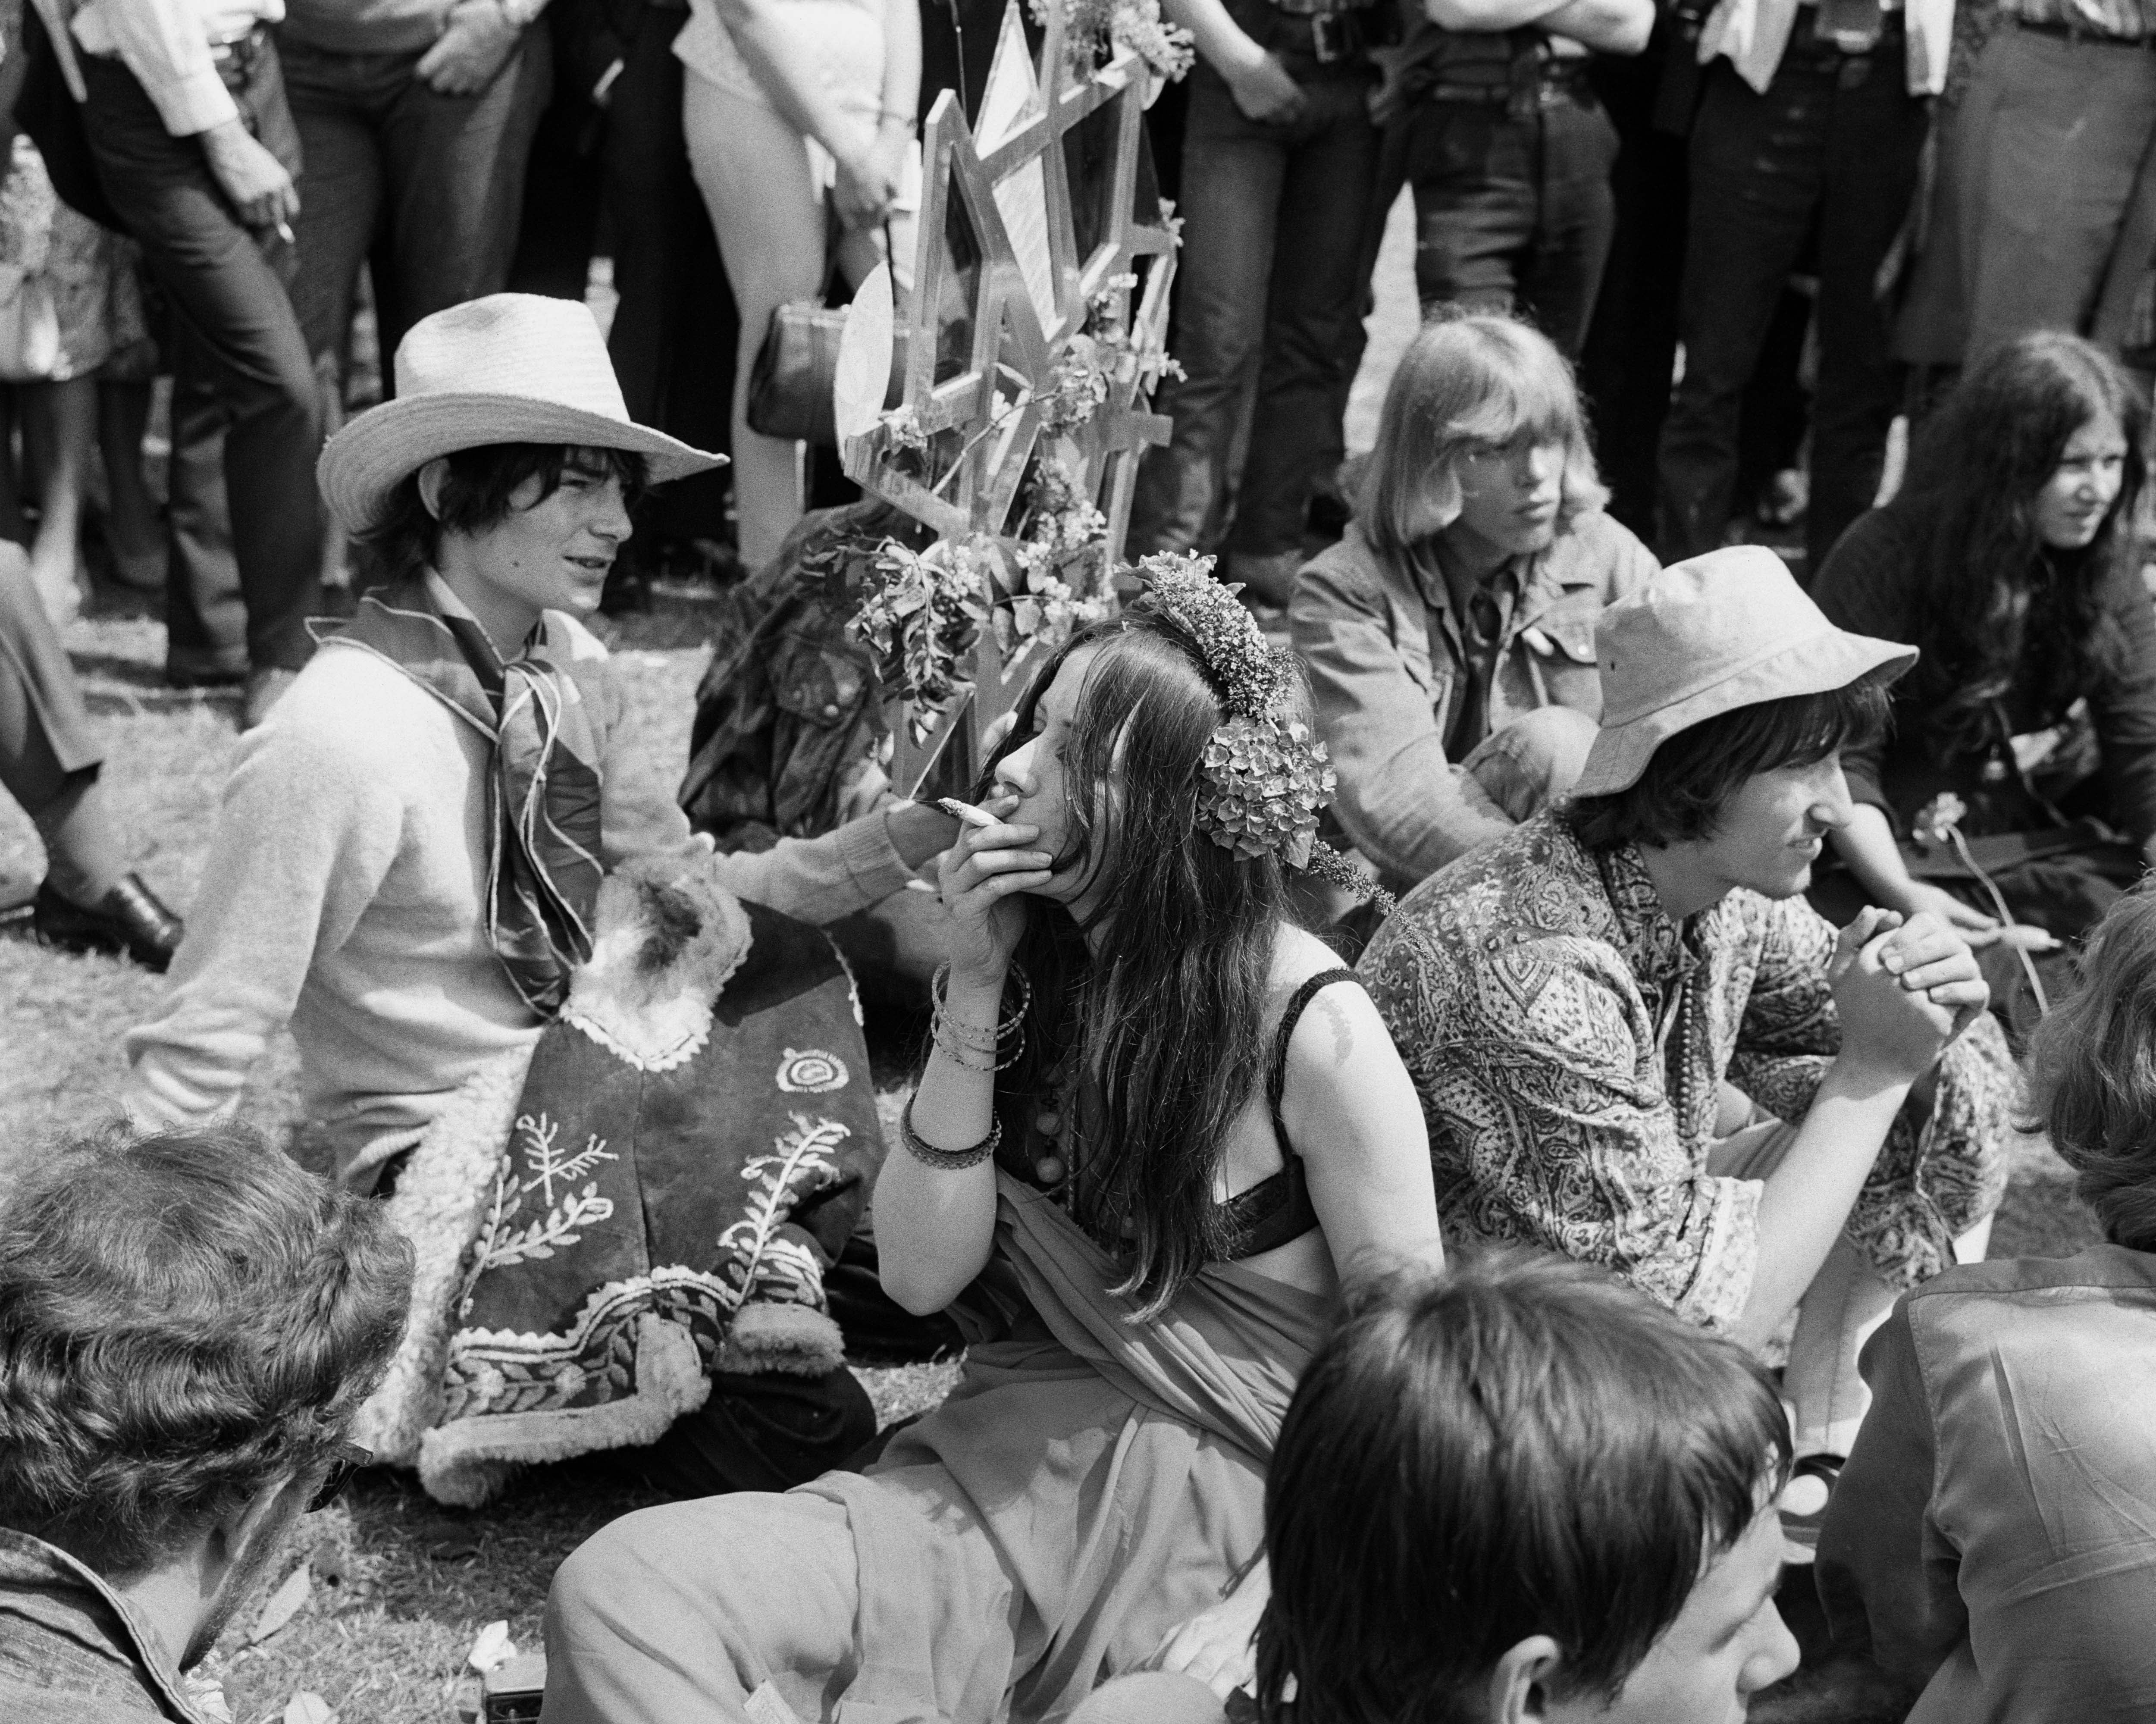 Speaker’s Corner in Hyde Park became a smoker’s paradise in the late Sixties, with London’s flower children gathering to support a campaign to legalise hashish and marijuana